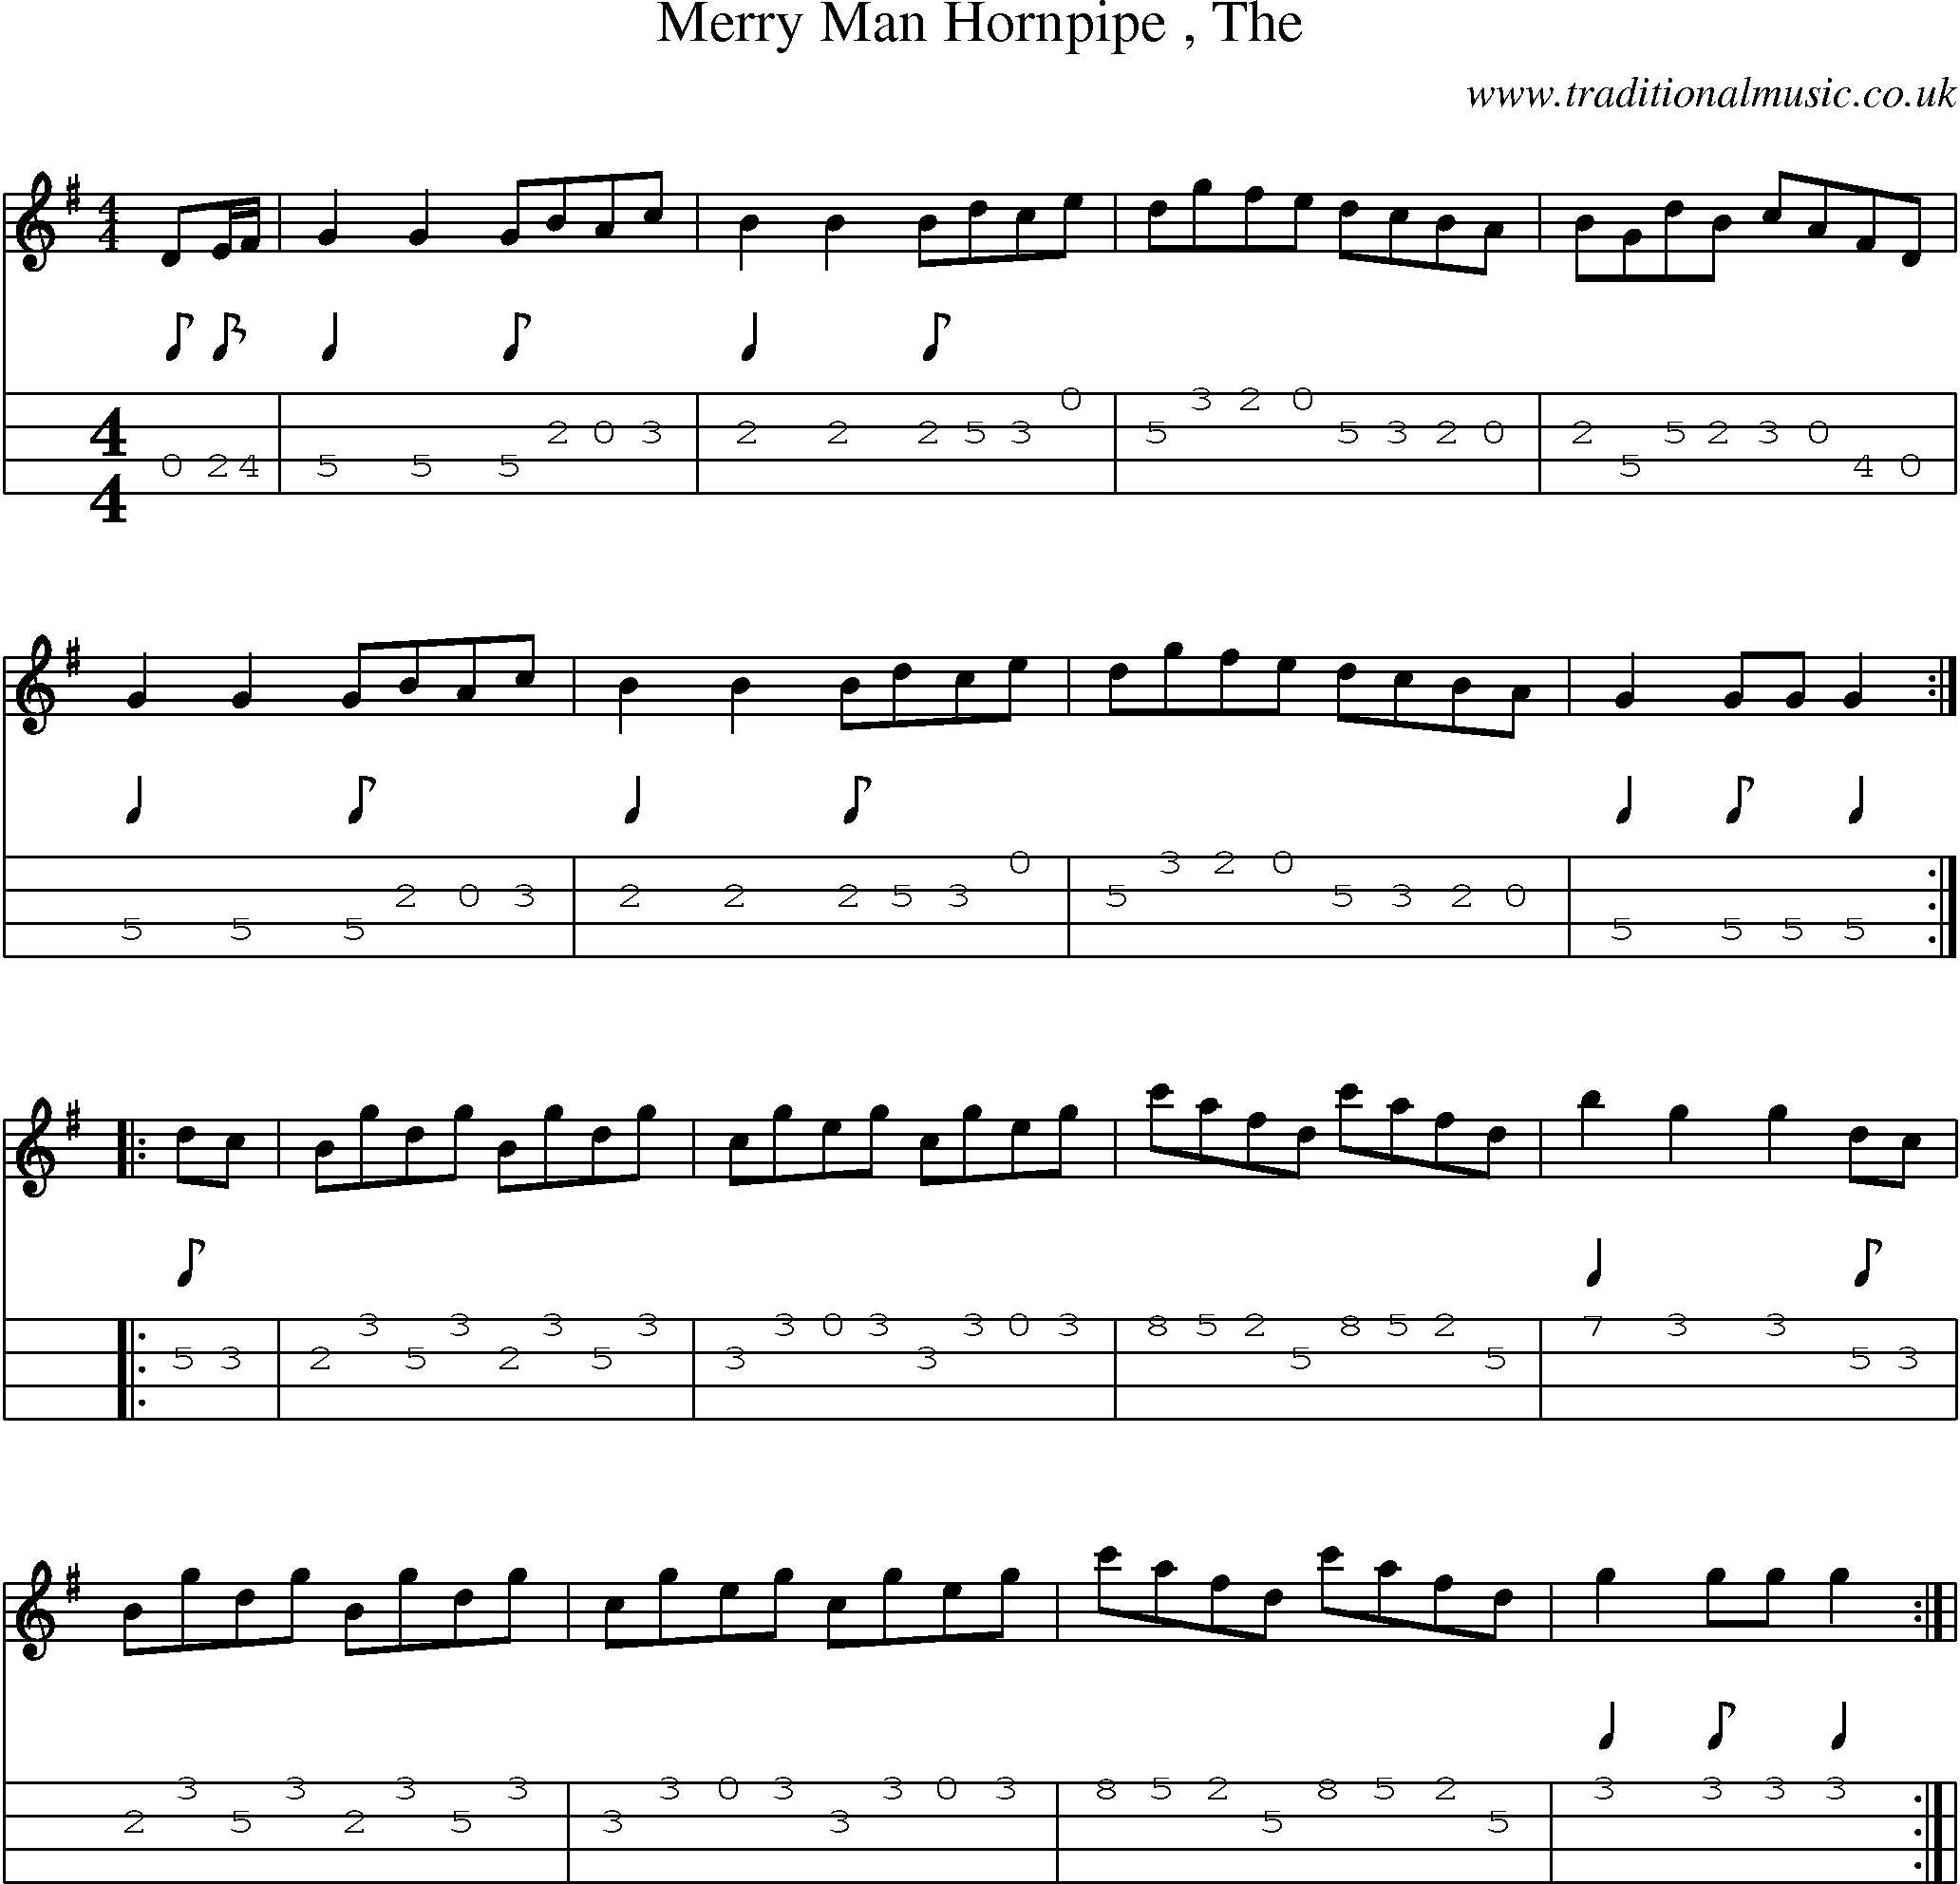 Music Score and Mandolin Tabs for Merry Man Hornpipe